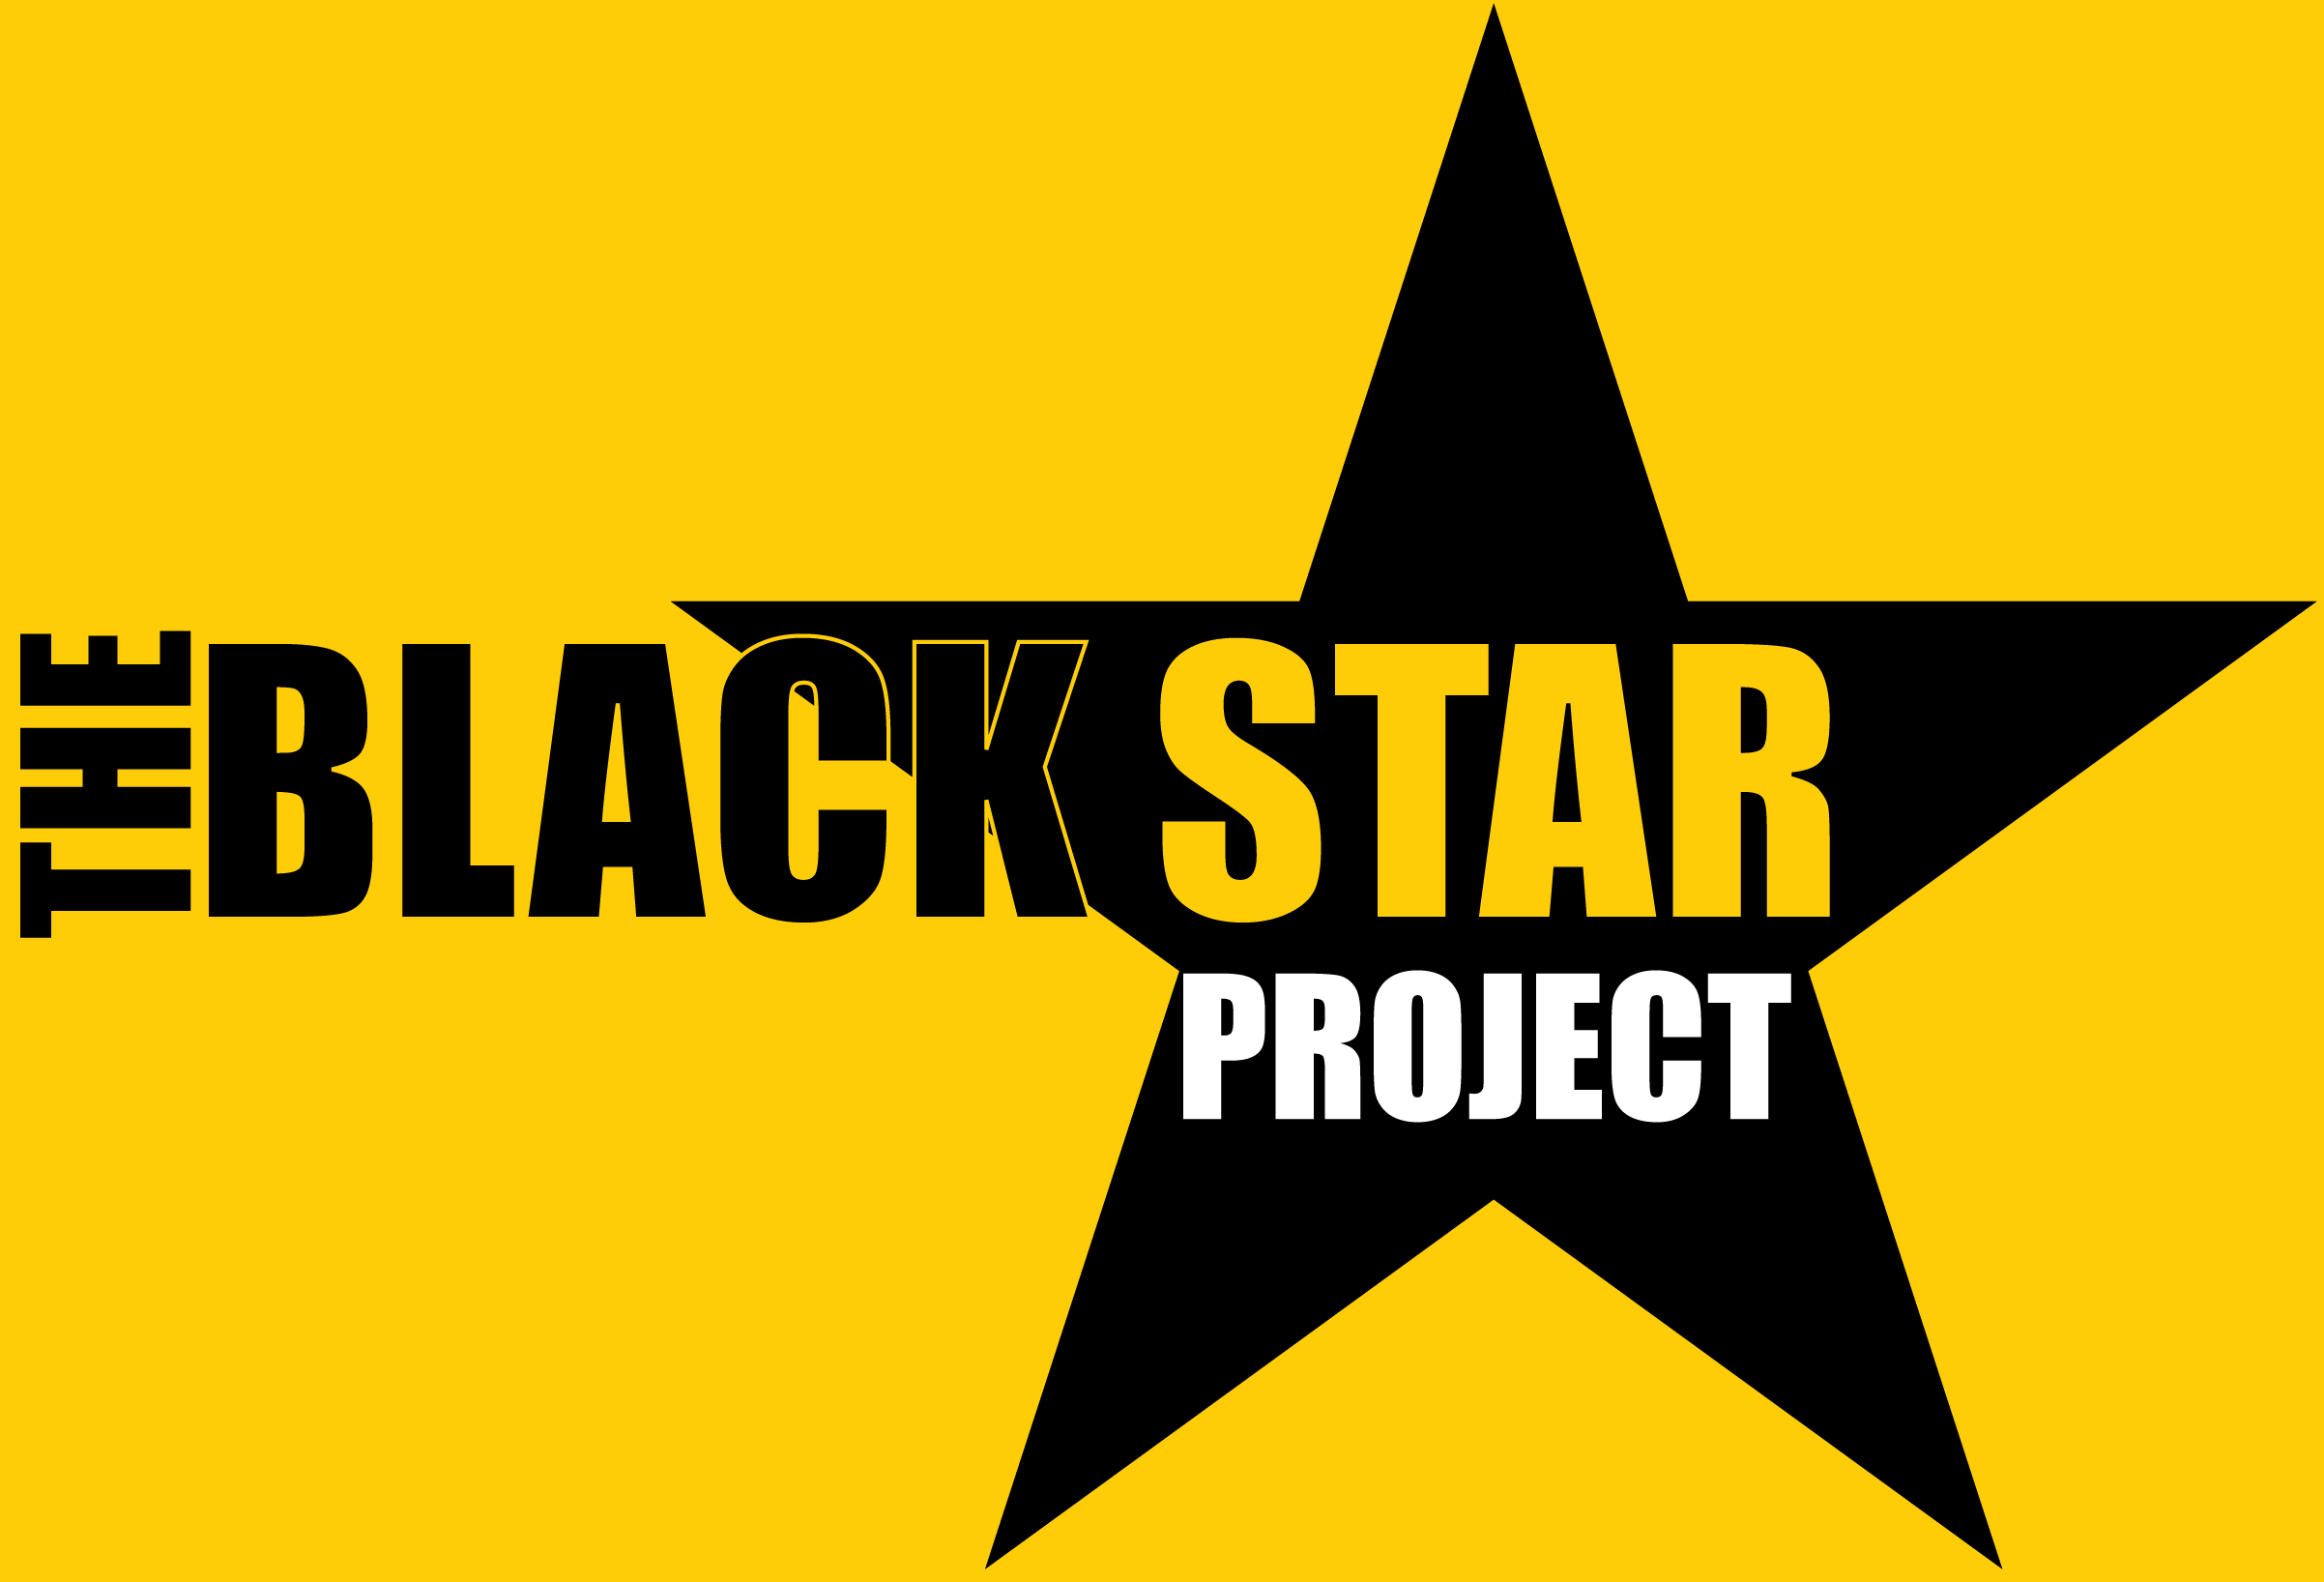 Looks Like a Black and Yellow D Logo - File:Black Star Project logo.png